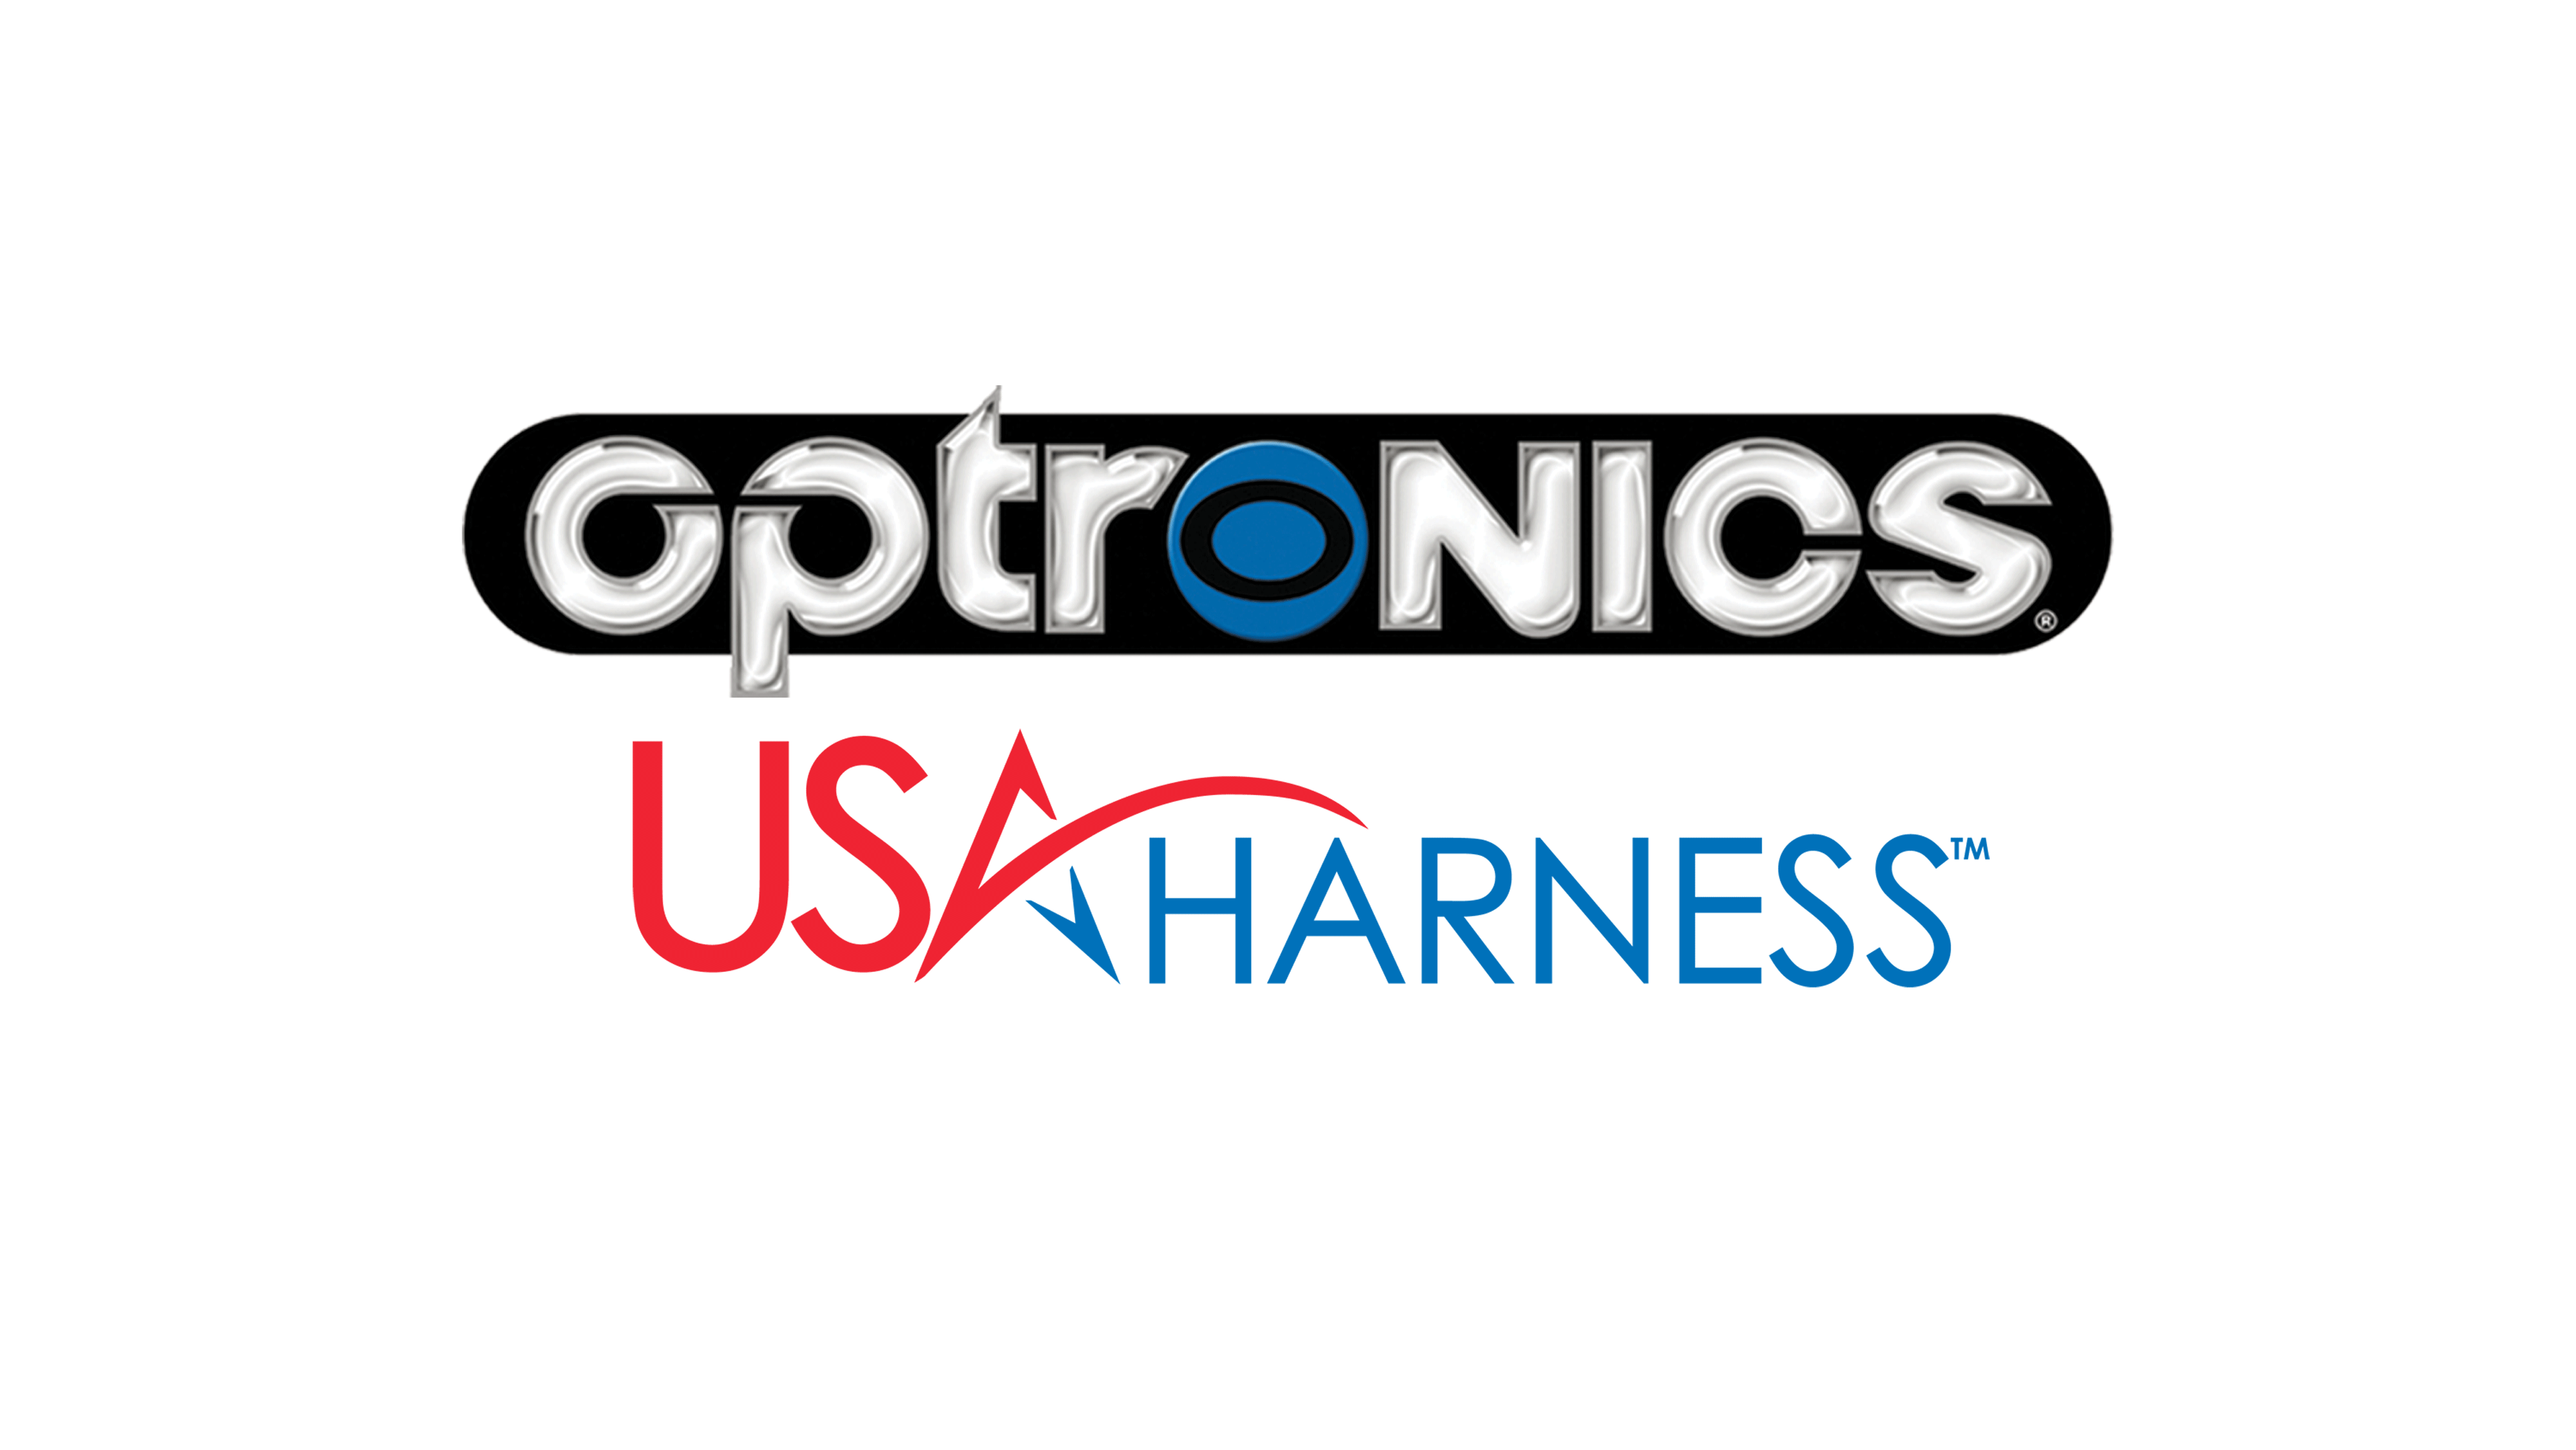 Optronics International is aa leading manufacturer of vehicle harnesses, electronic control systems and LED lighting for the global transportation industry.